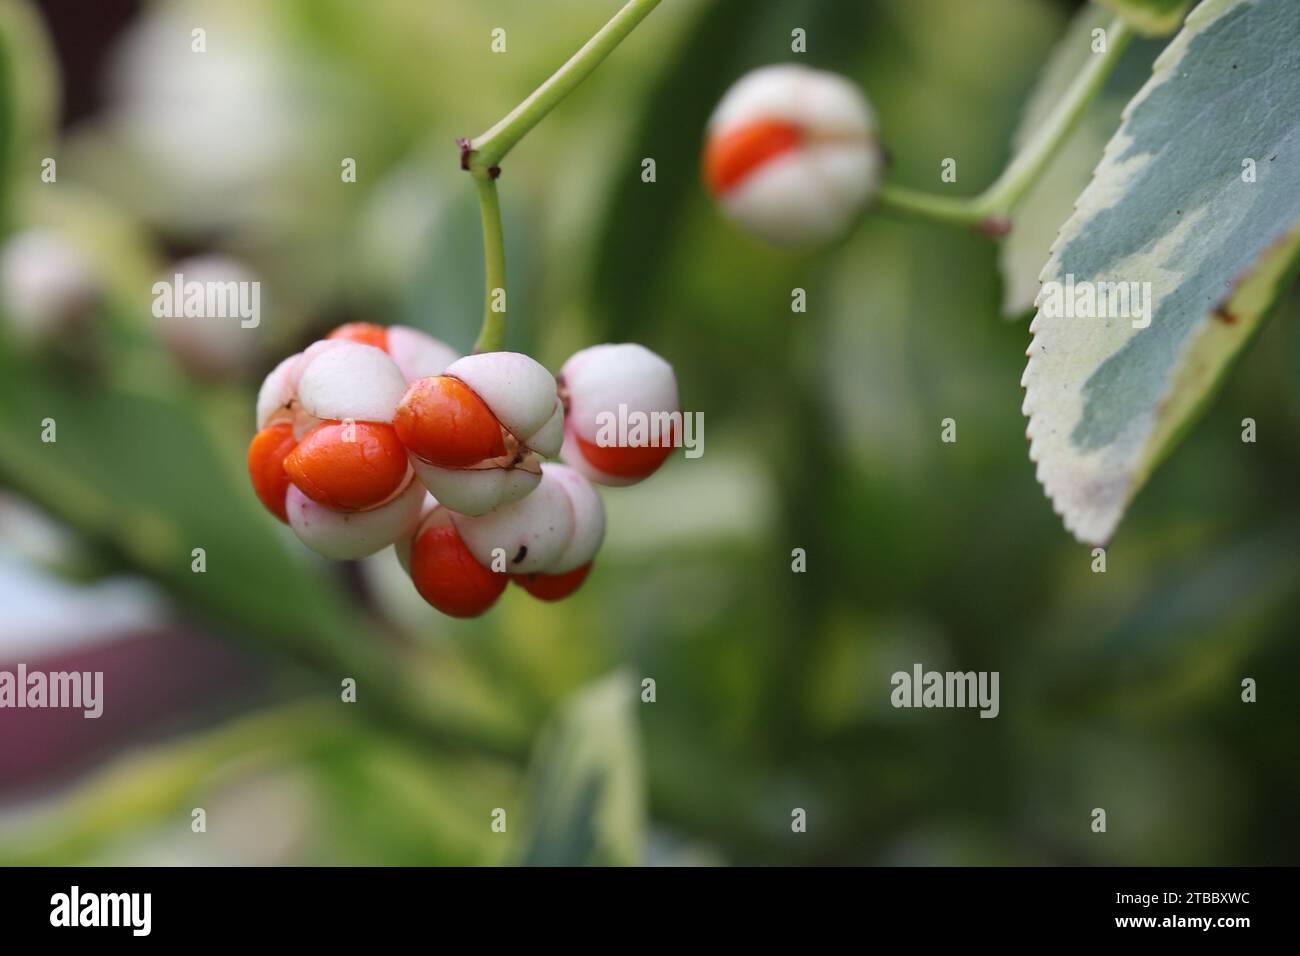 Close-up of the eye-catching spherical white-orange fruit ornament of a Euonymus fortunei 'Emerald'n Gold' bush against a natural blurry background Stock Photo